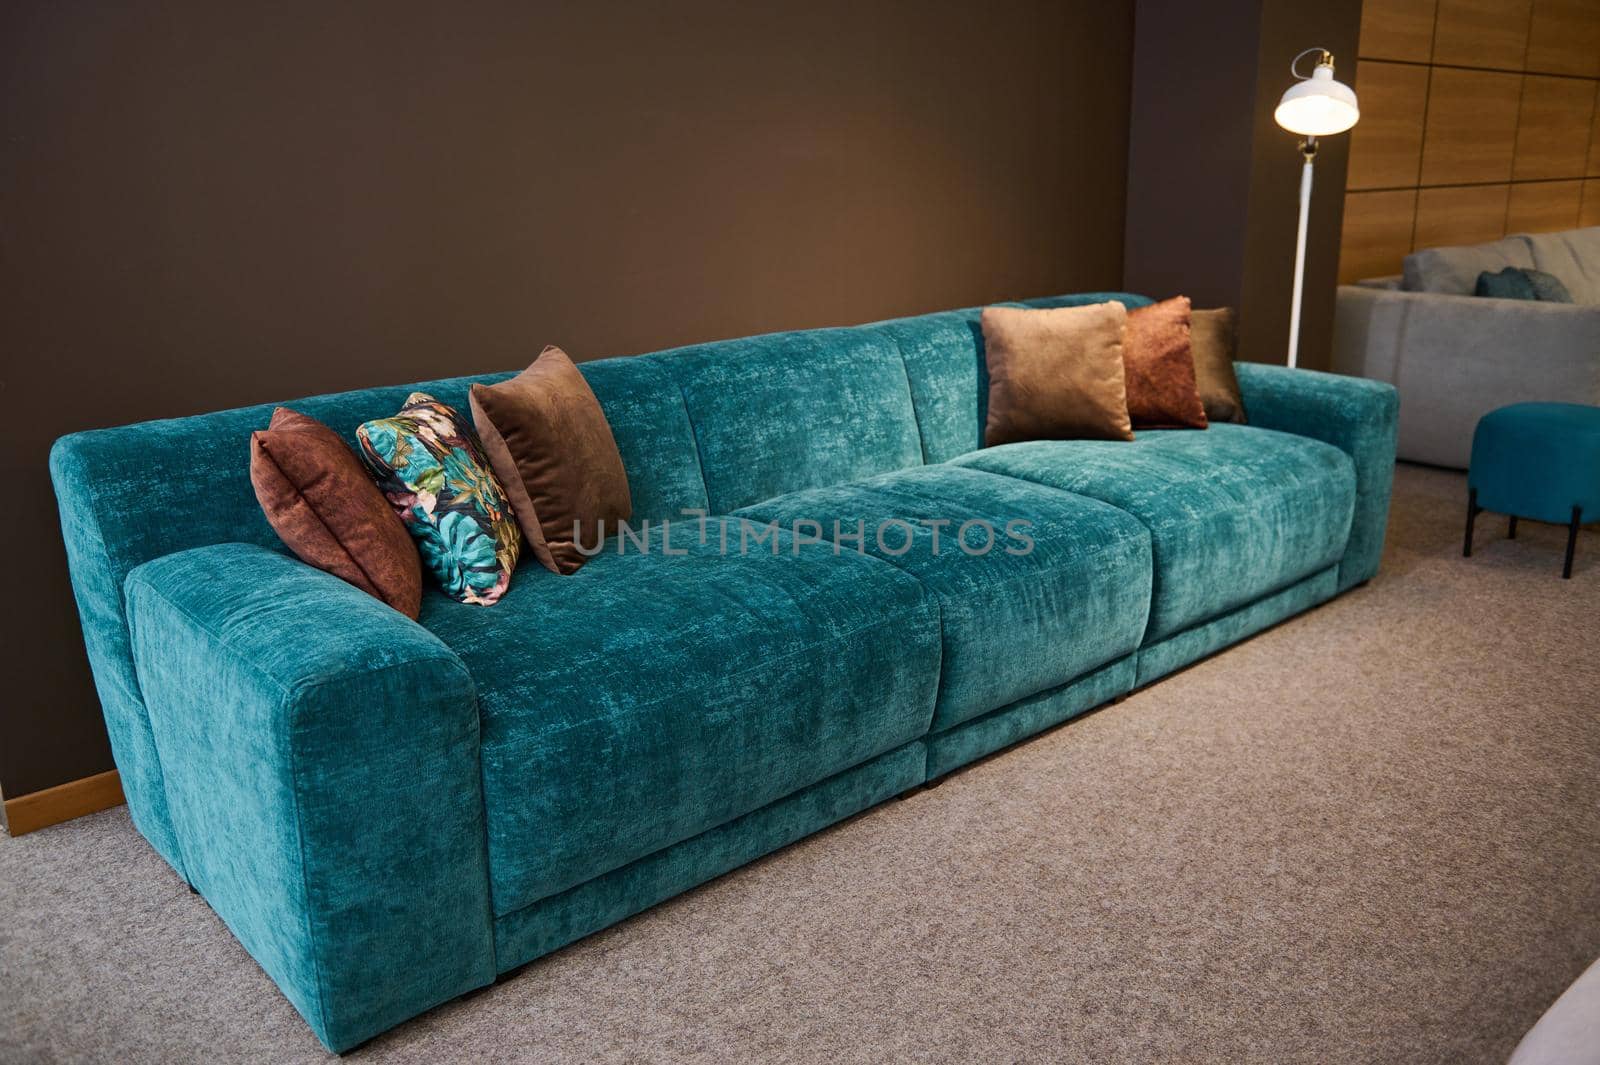 Exhibition of modern stylish upholstered furniture in the showroom of a furniture store. Focus on a turquoise soft velour sofa and brown cushions lit by a lamp against a brown wall background